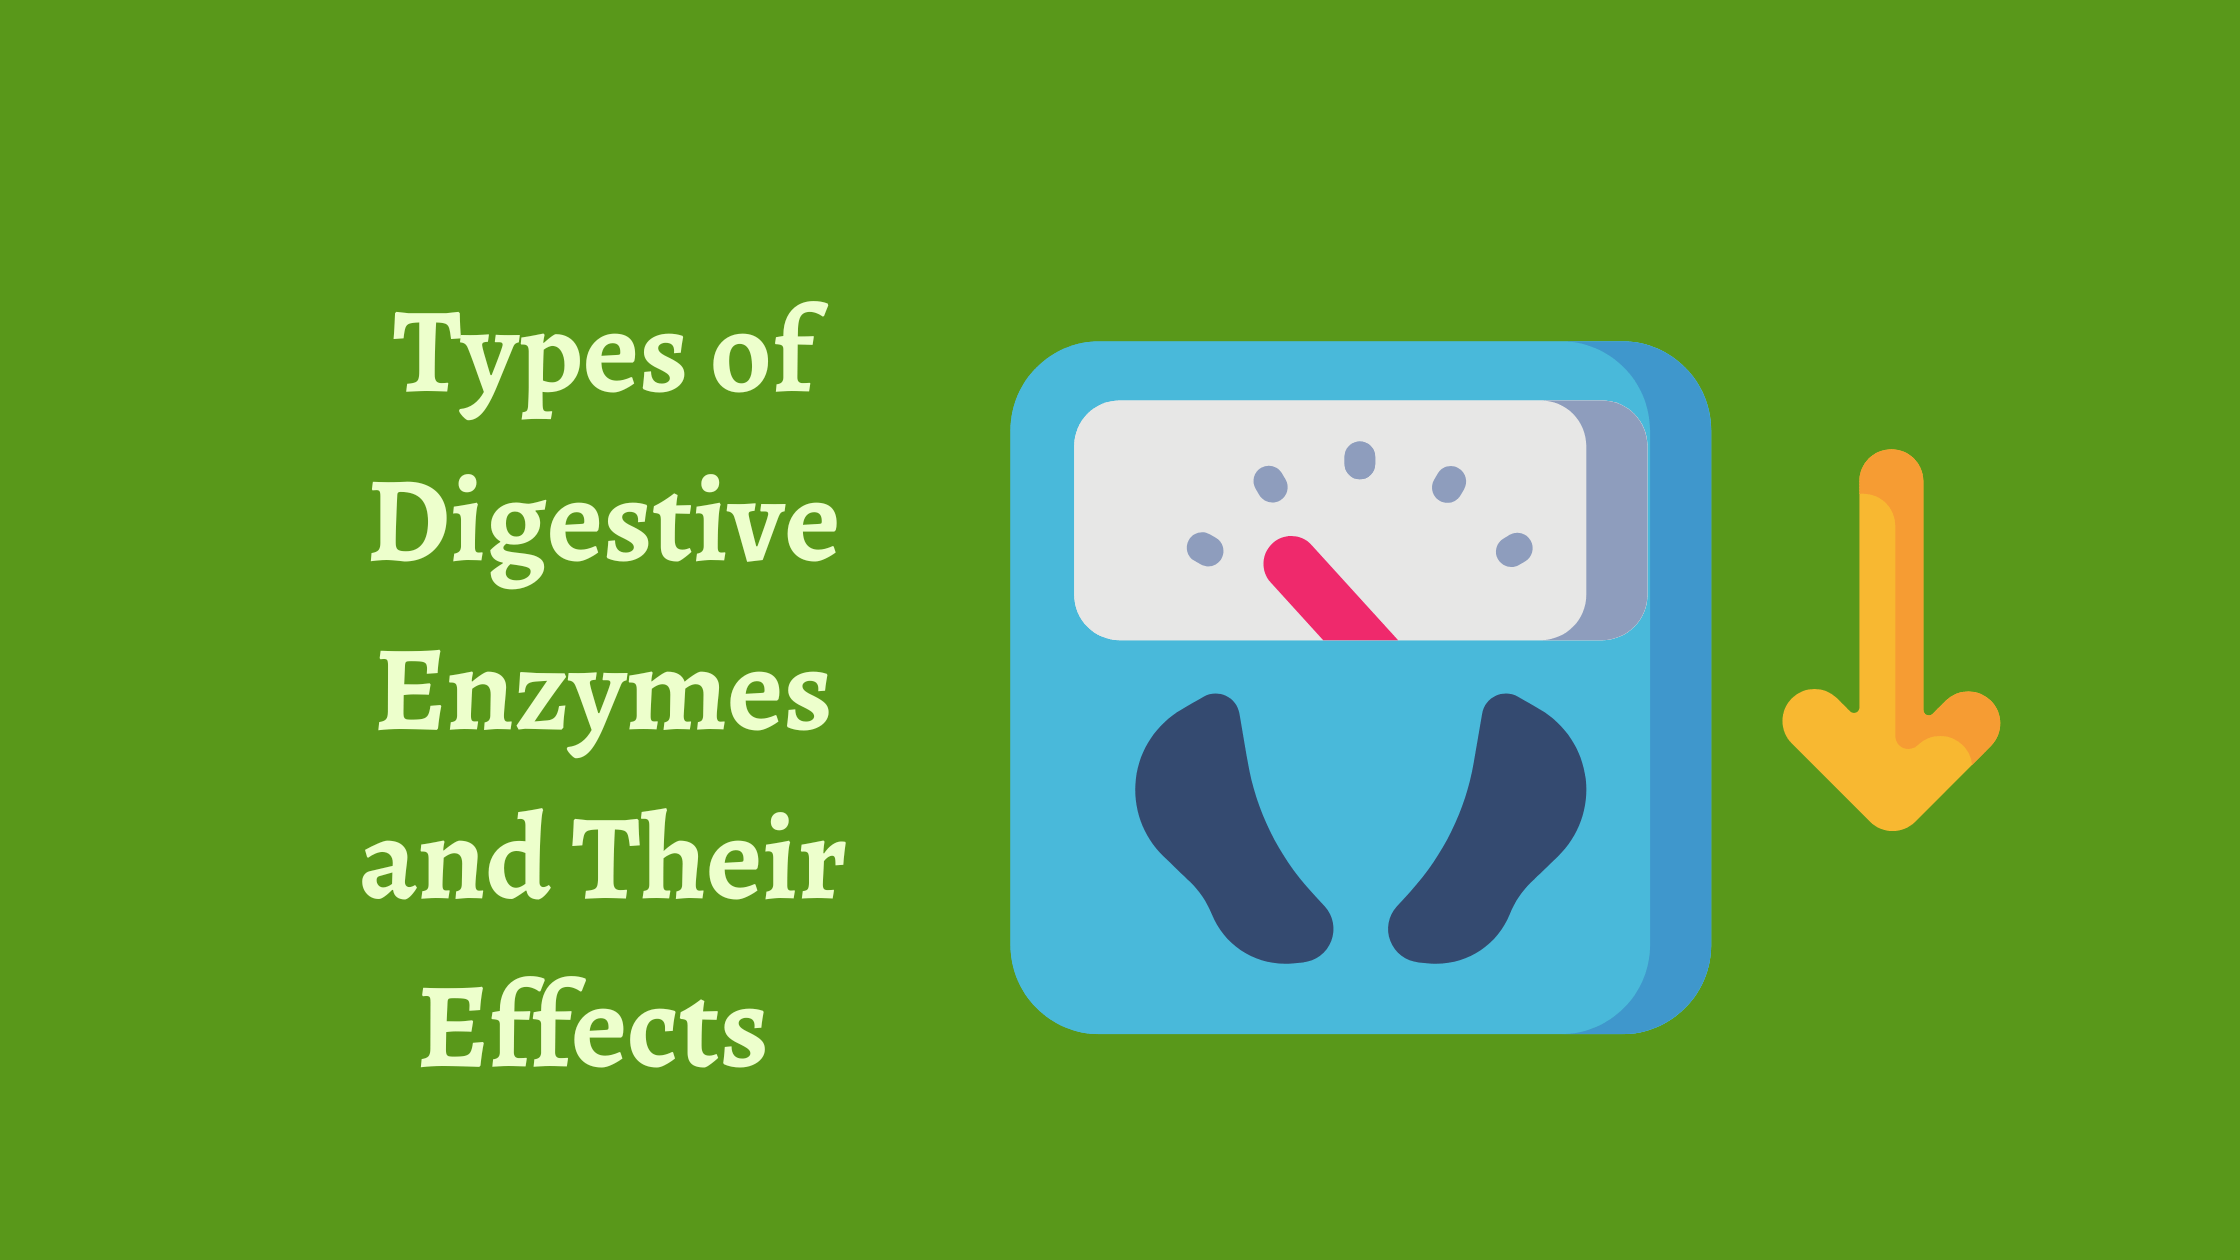 Types of Digestive Enzymes and Their Effects